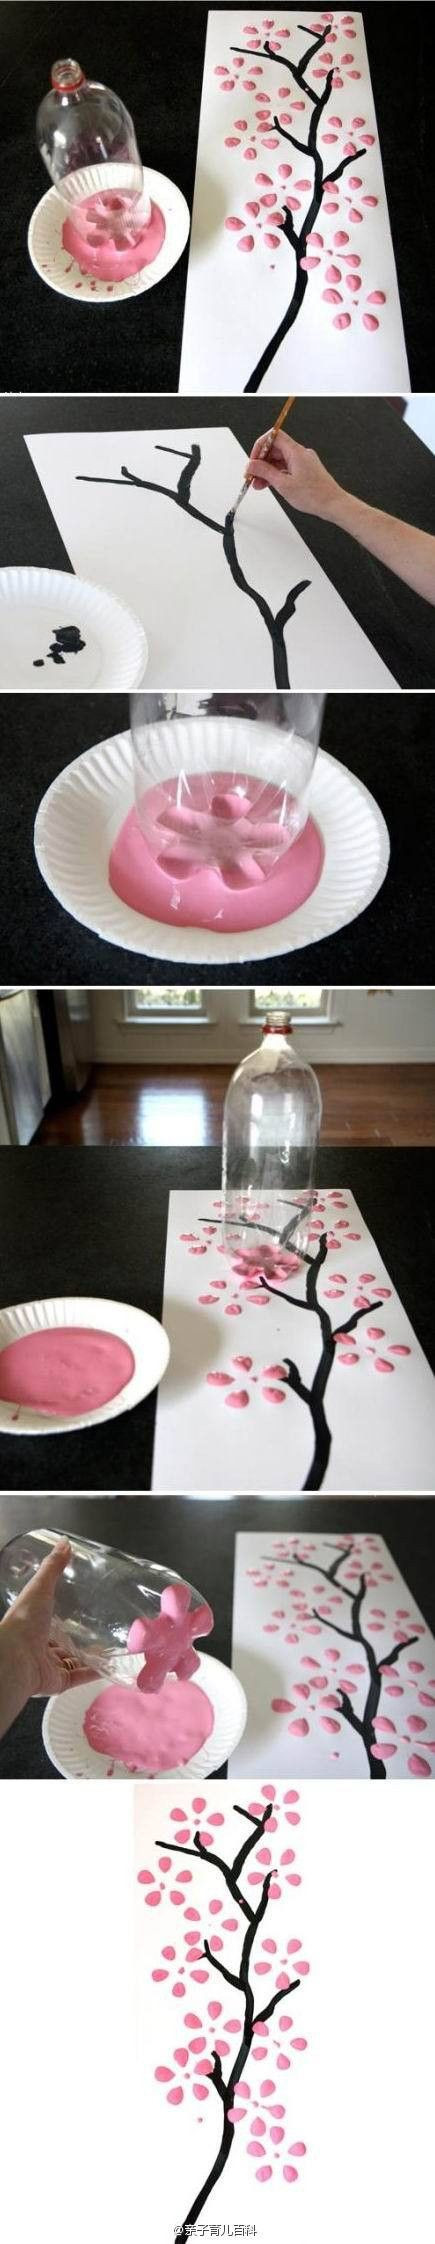 Parenting Wikipedia: Easily painted cherry blossom...